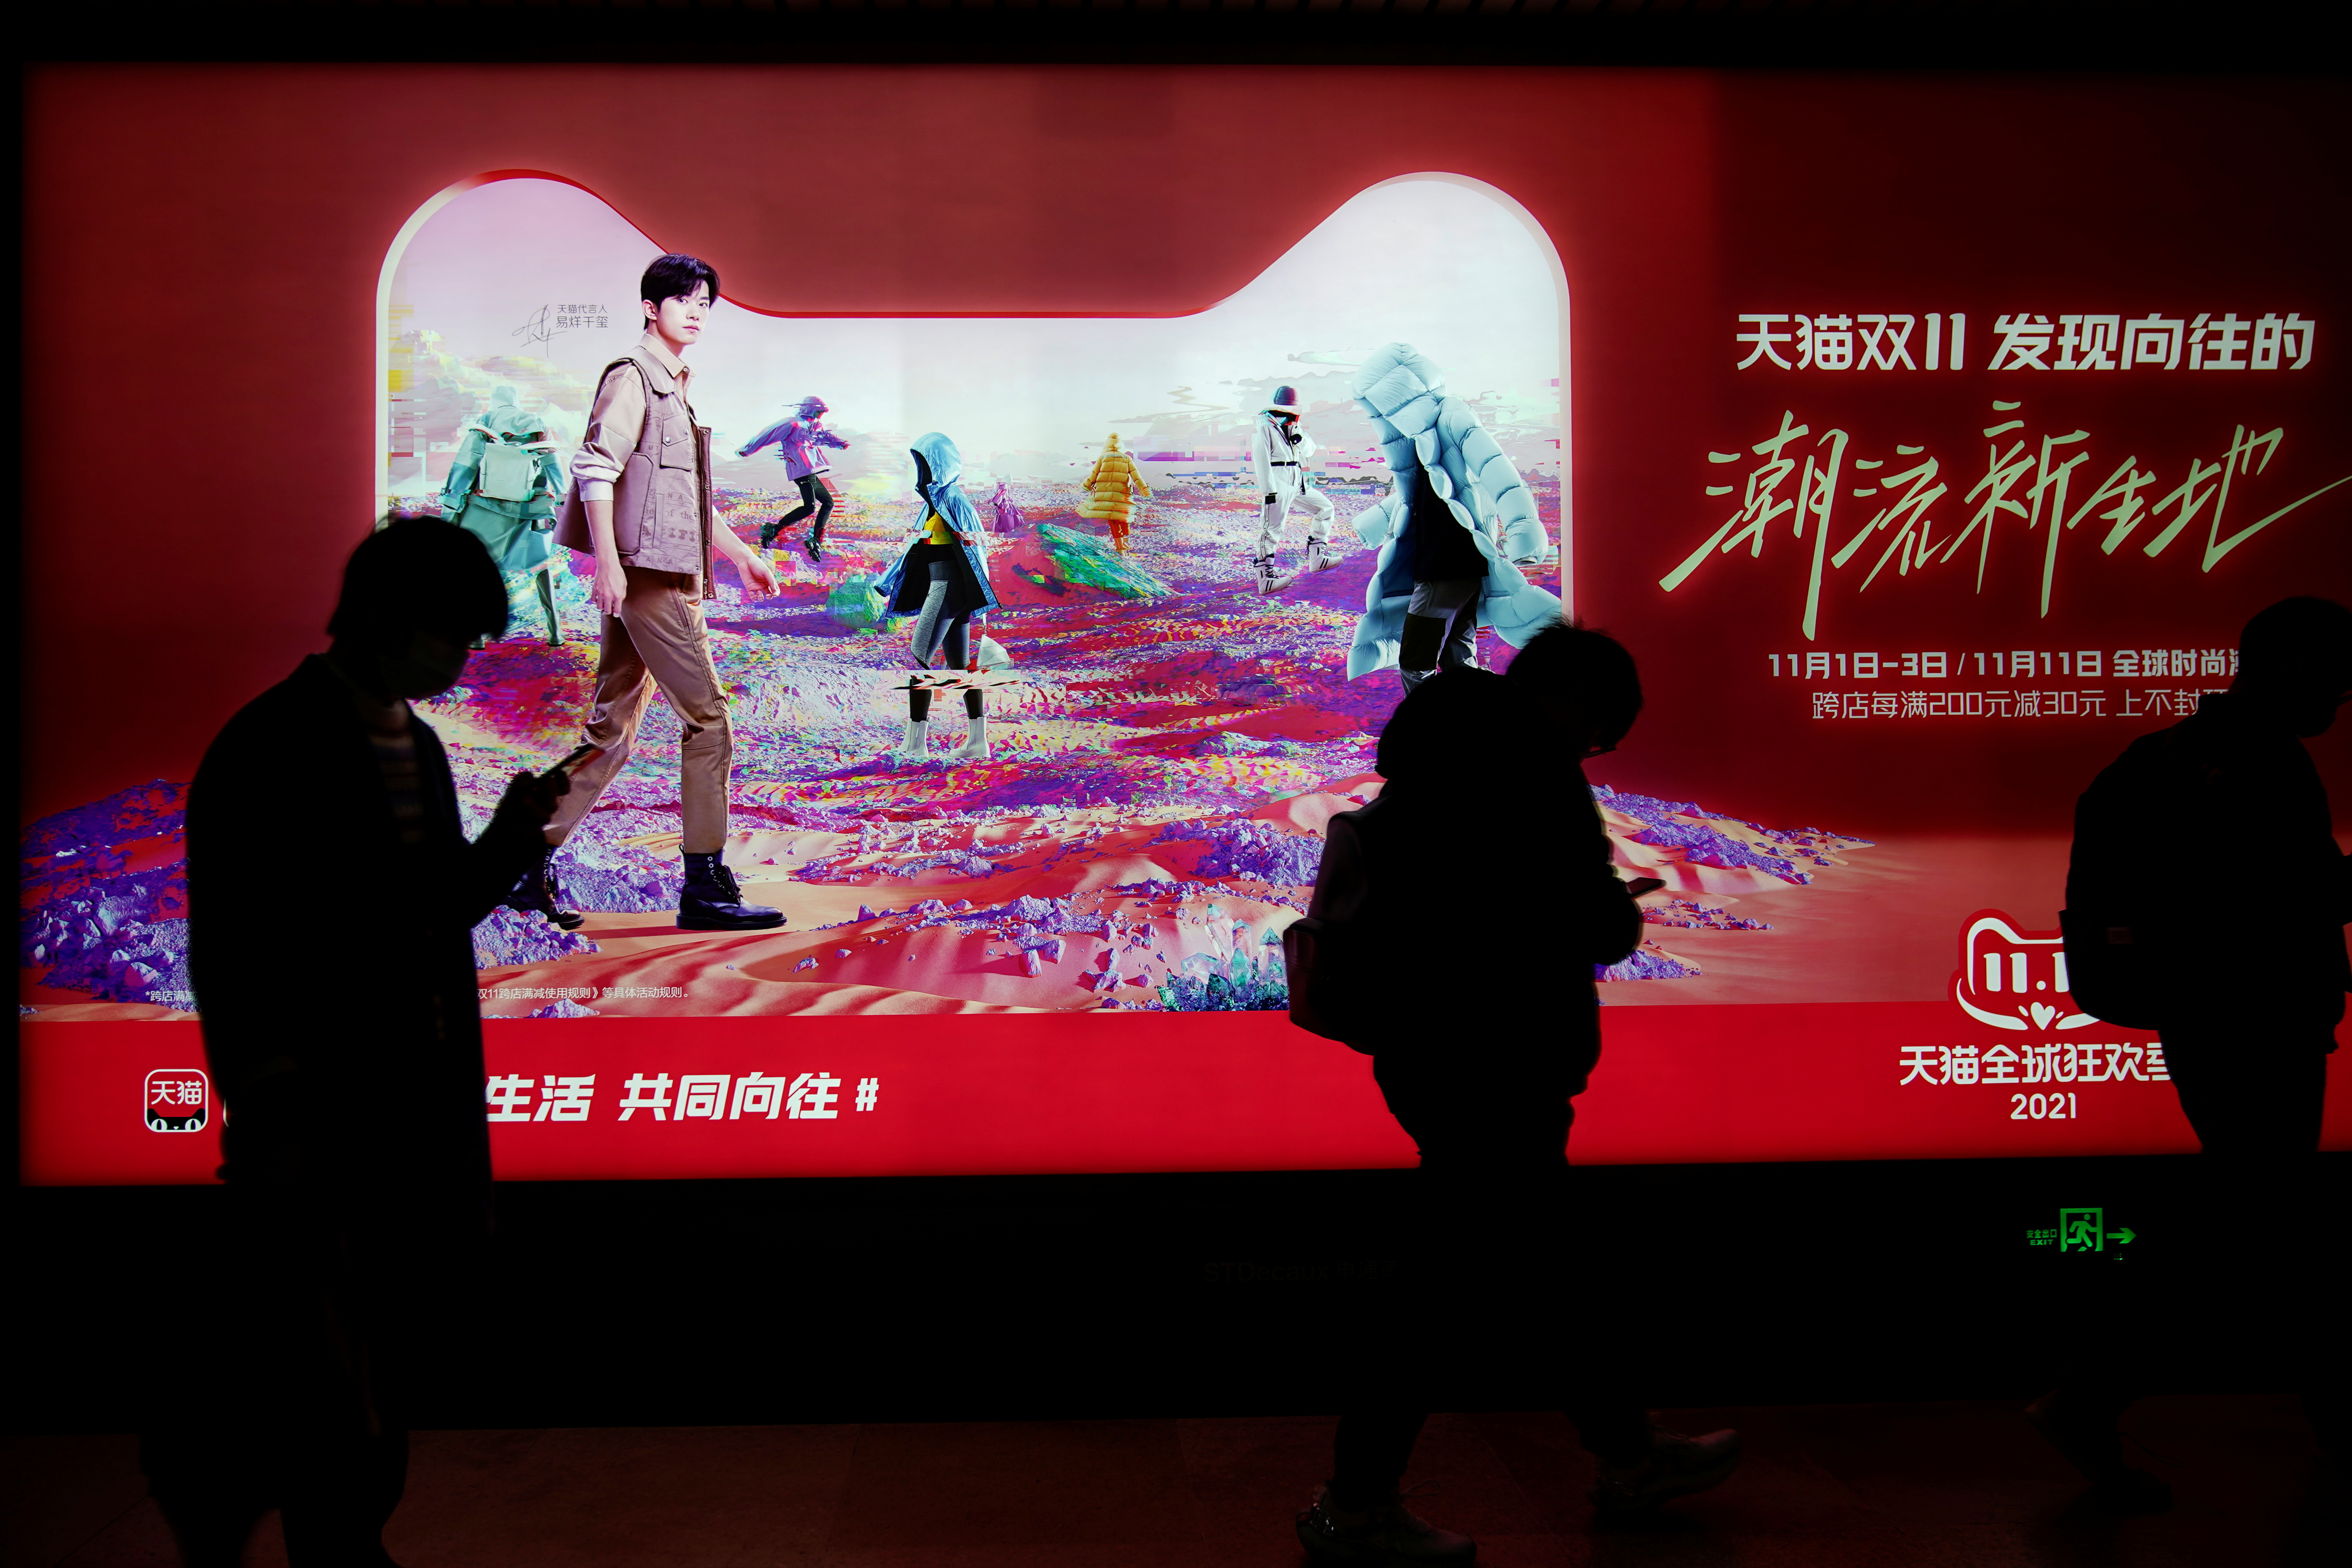 An advertisement to promote Alibaba's Singles' Day shopping festival is pictured in Shanghai, China November 11, 2021. REUTERS/Aly Song